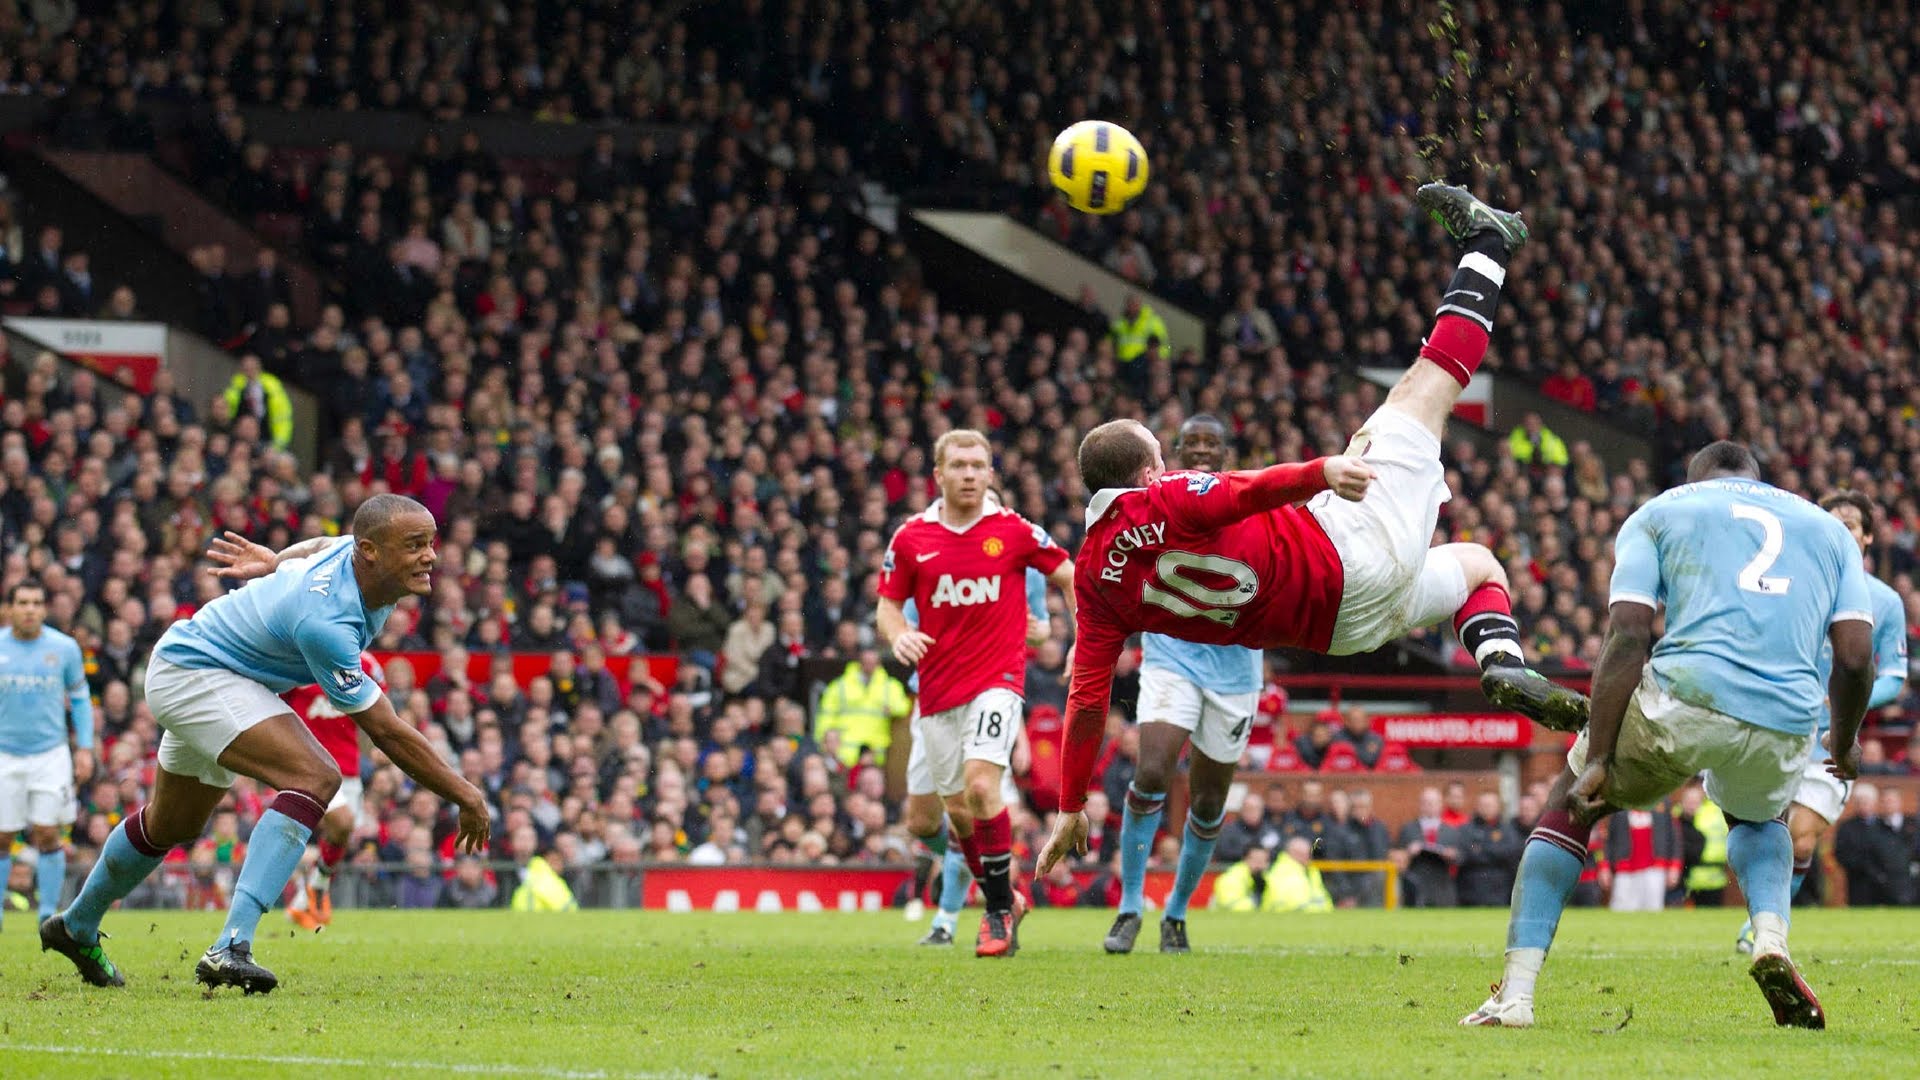 Rooney Bicycle kick Vs Manchester City HD - YouTube